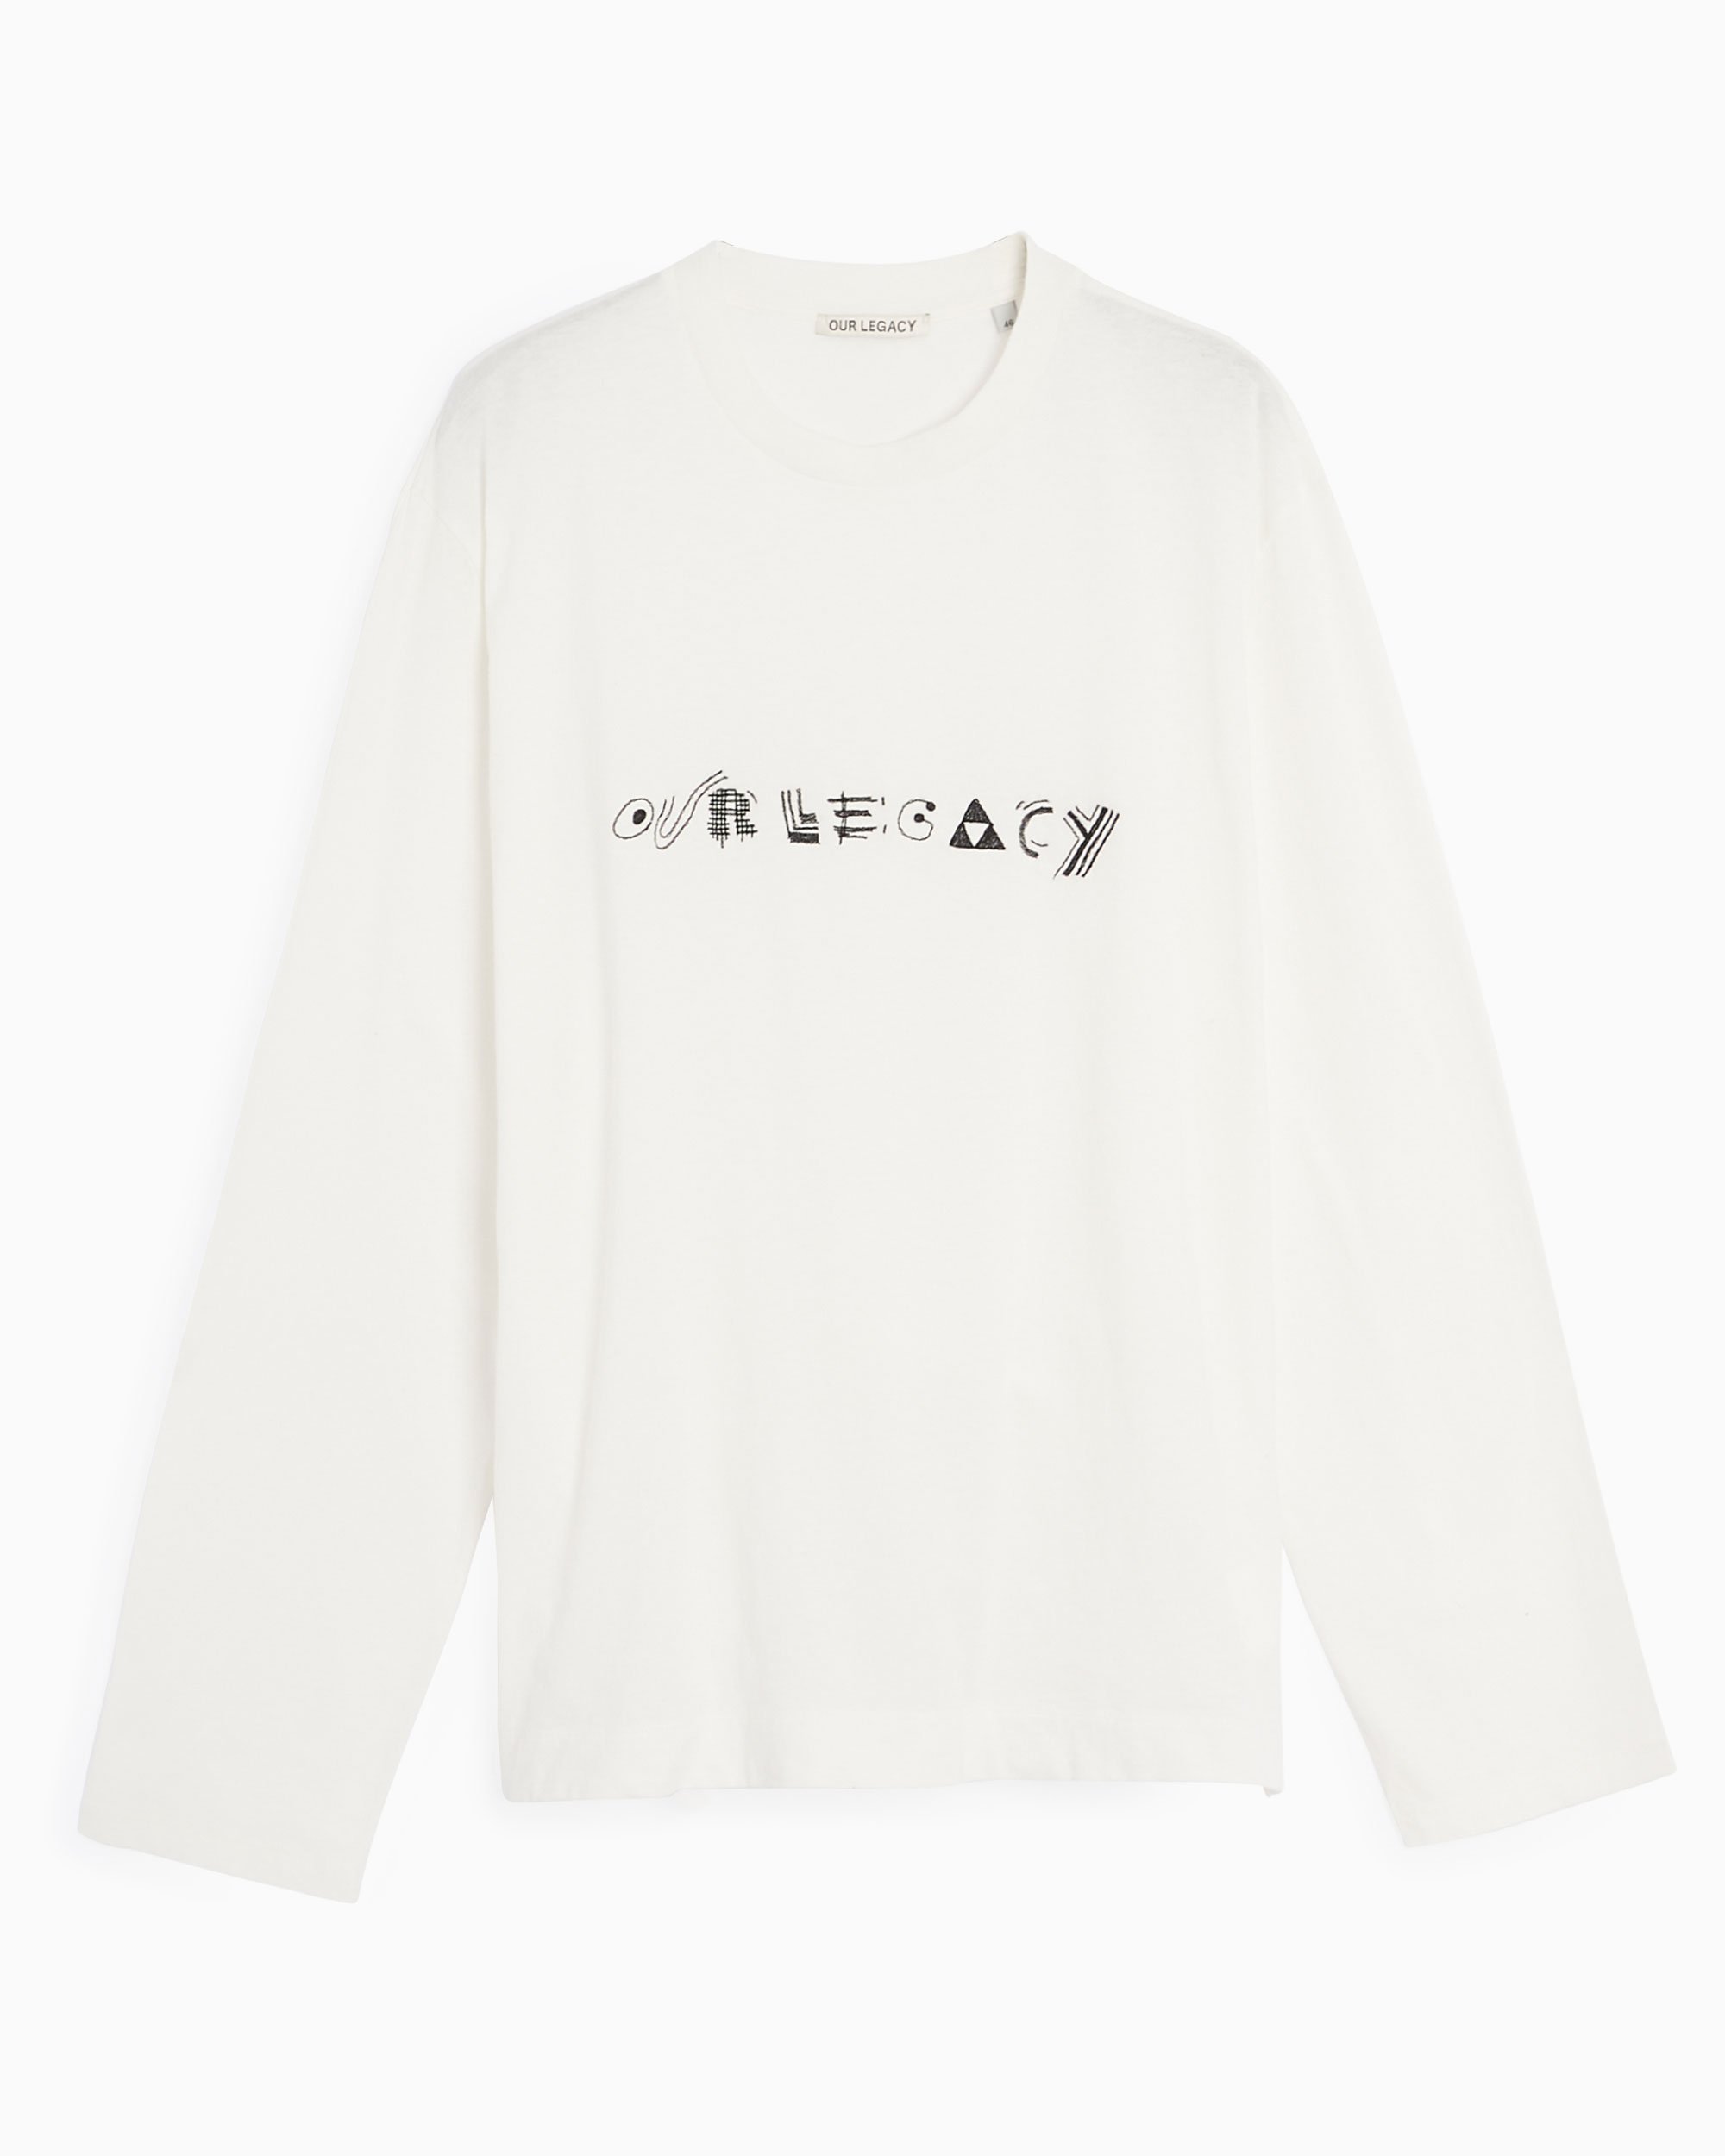 Our Legacy Box Men's Long Sleeve T-Shirt White M4226CLW